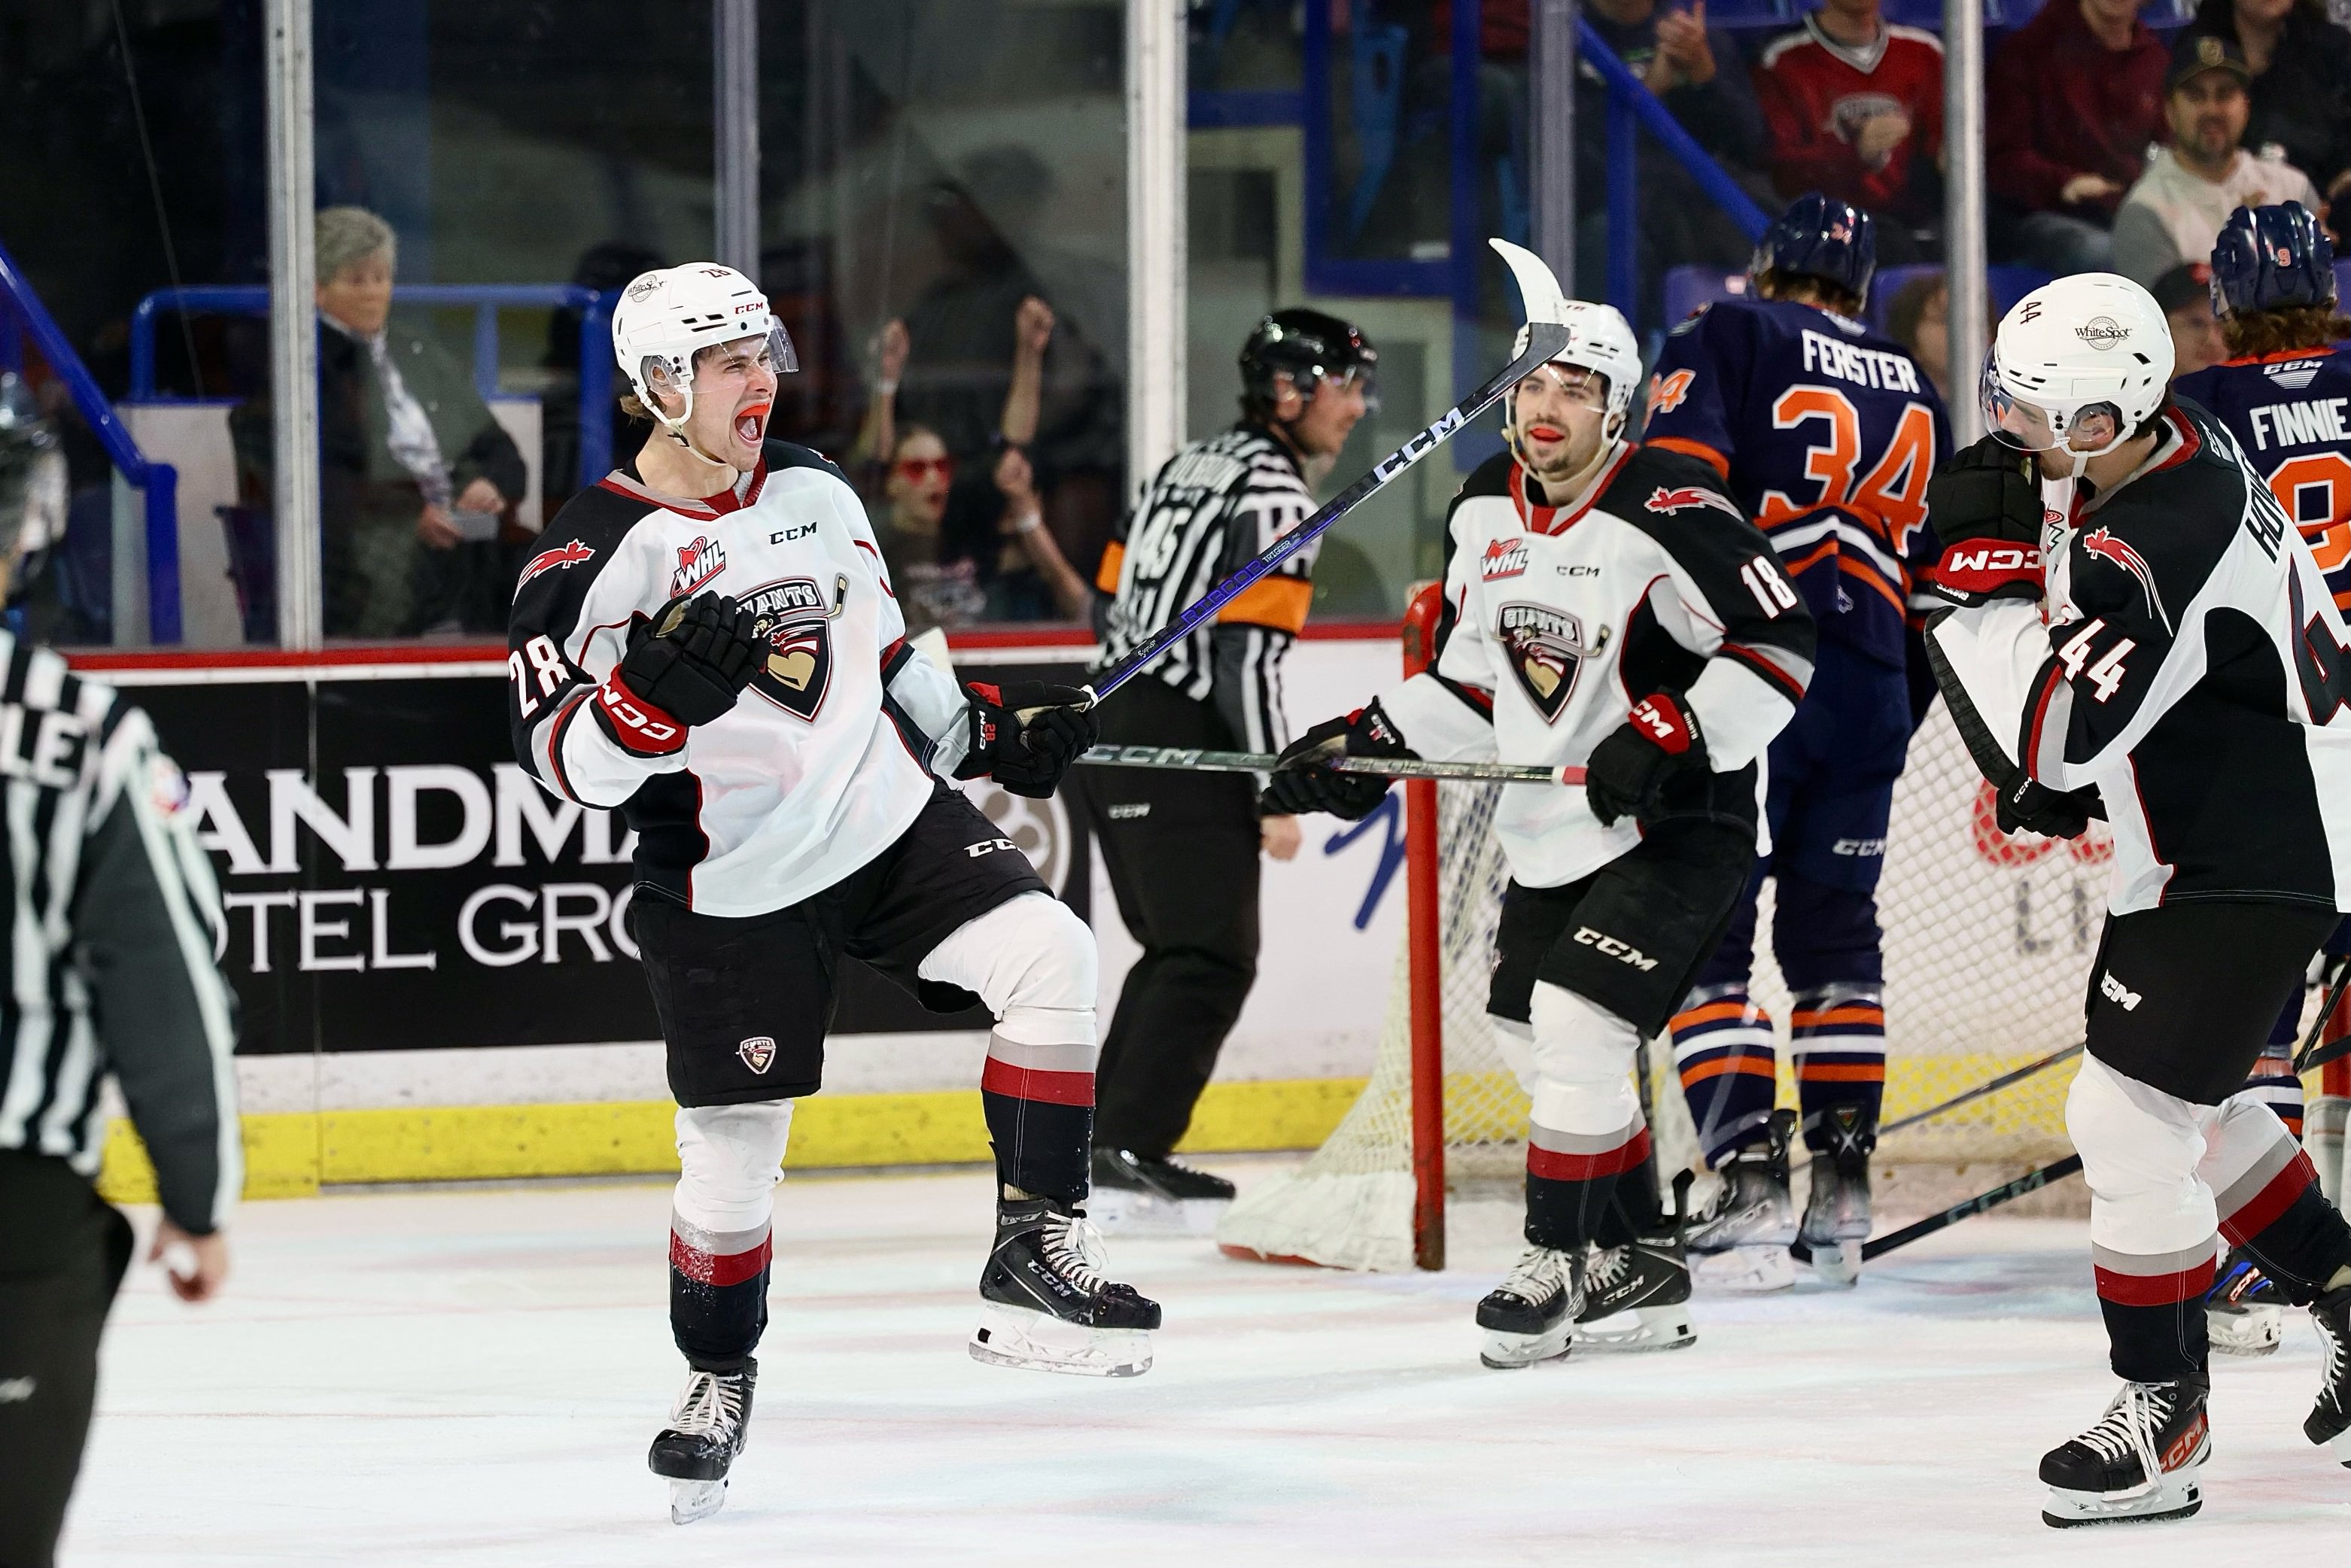 The Giants are up against the Calgary Hitmen this afternoon at the